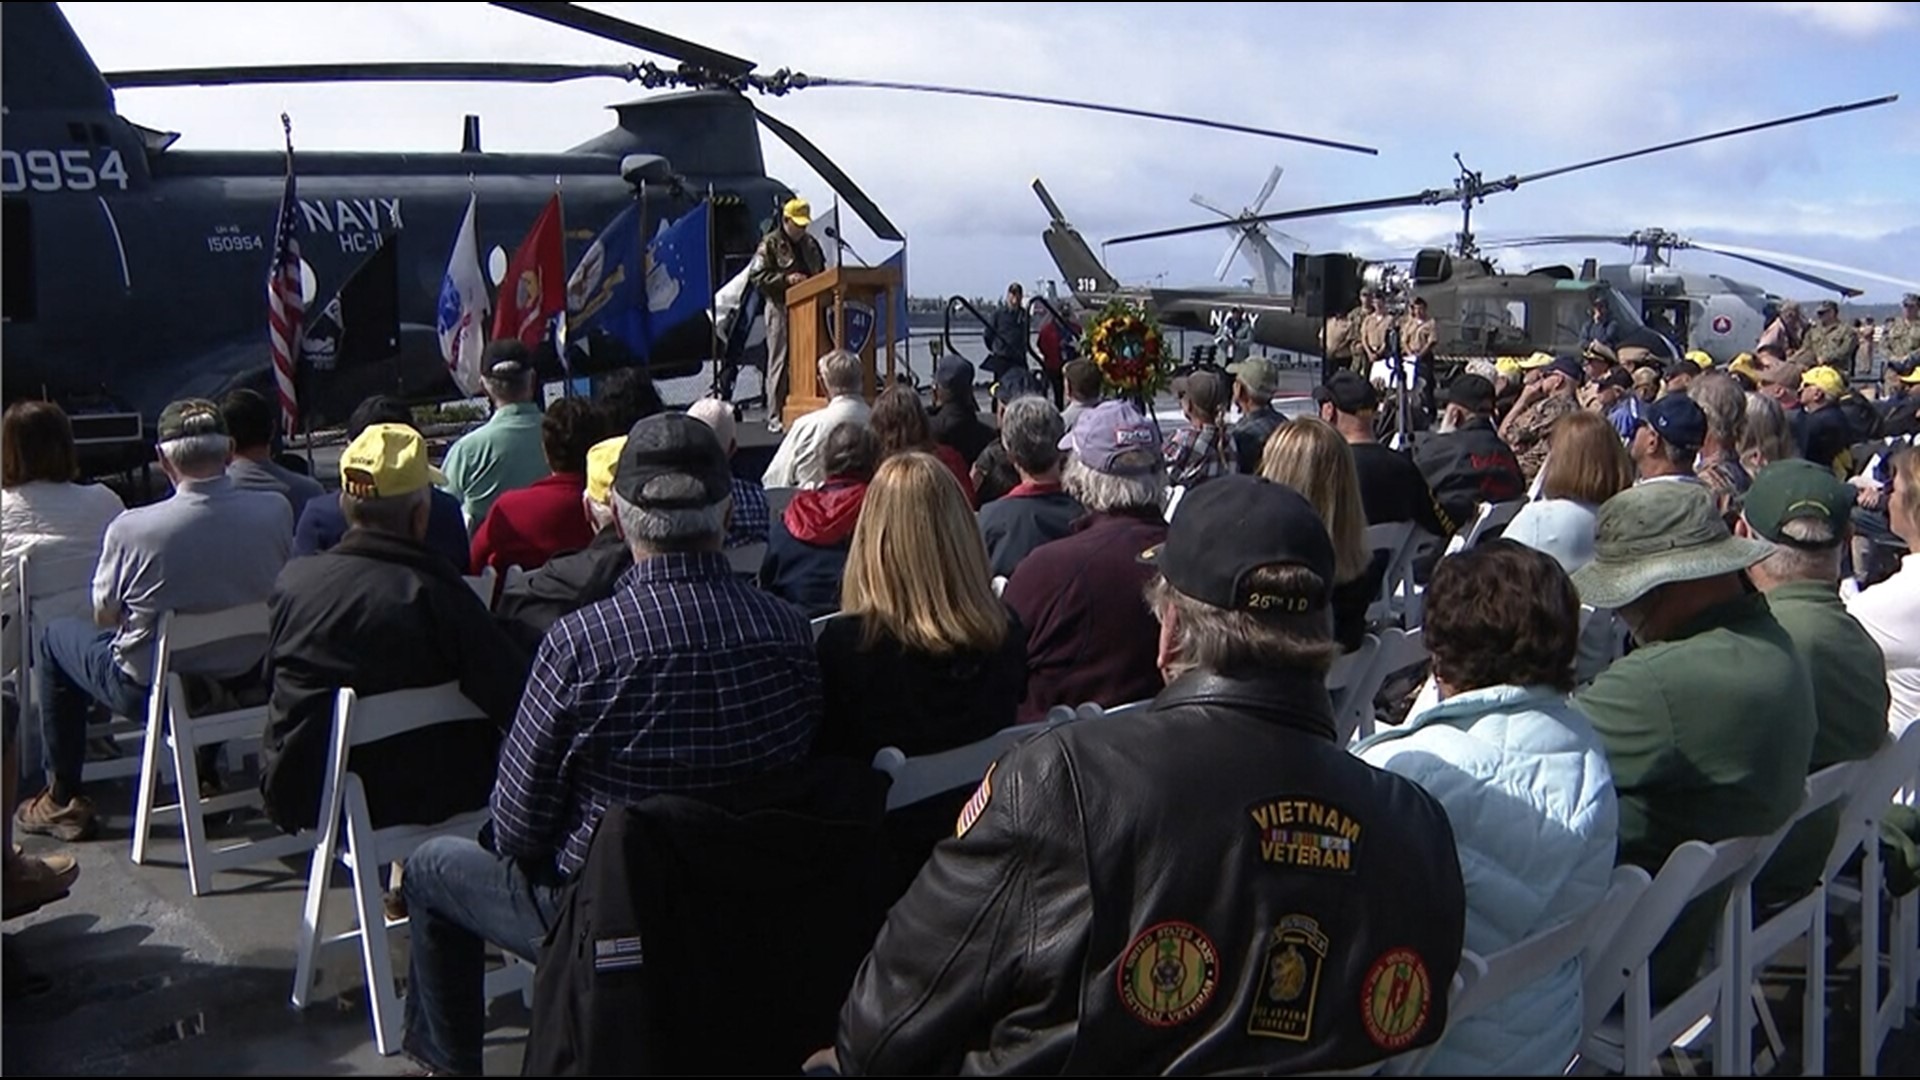 The USS Midway Museum will honor and pay tribute to all U.S. military veterans who served during the Vietnam War on March 29 starting at 9 a.m.